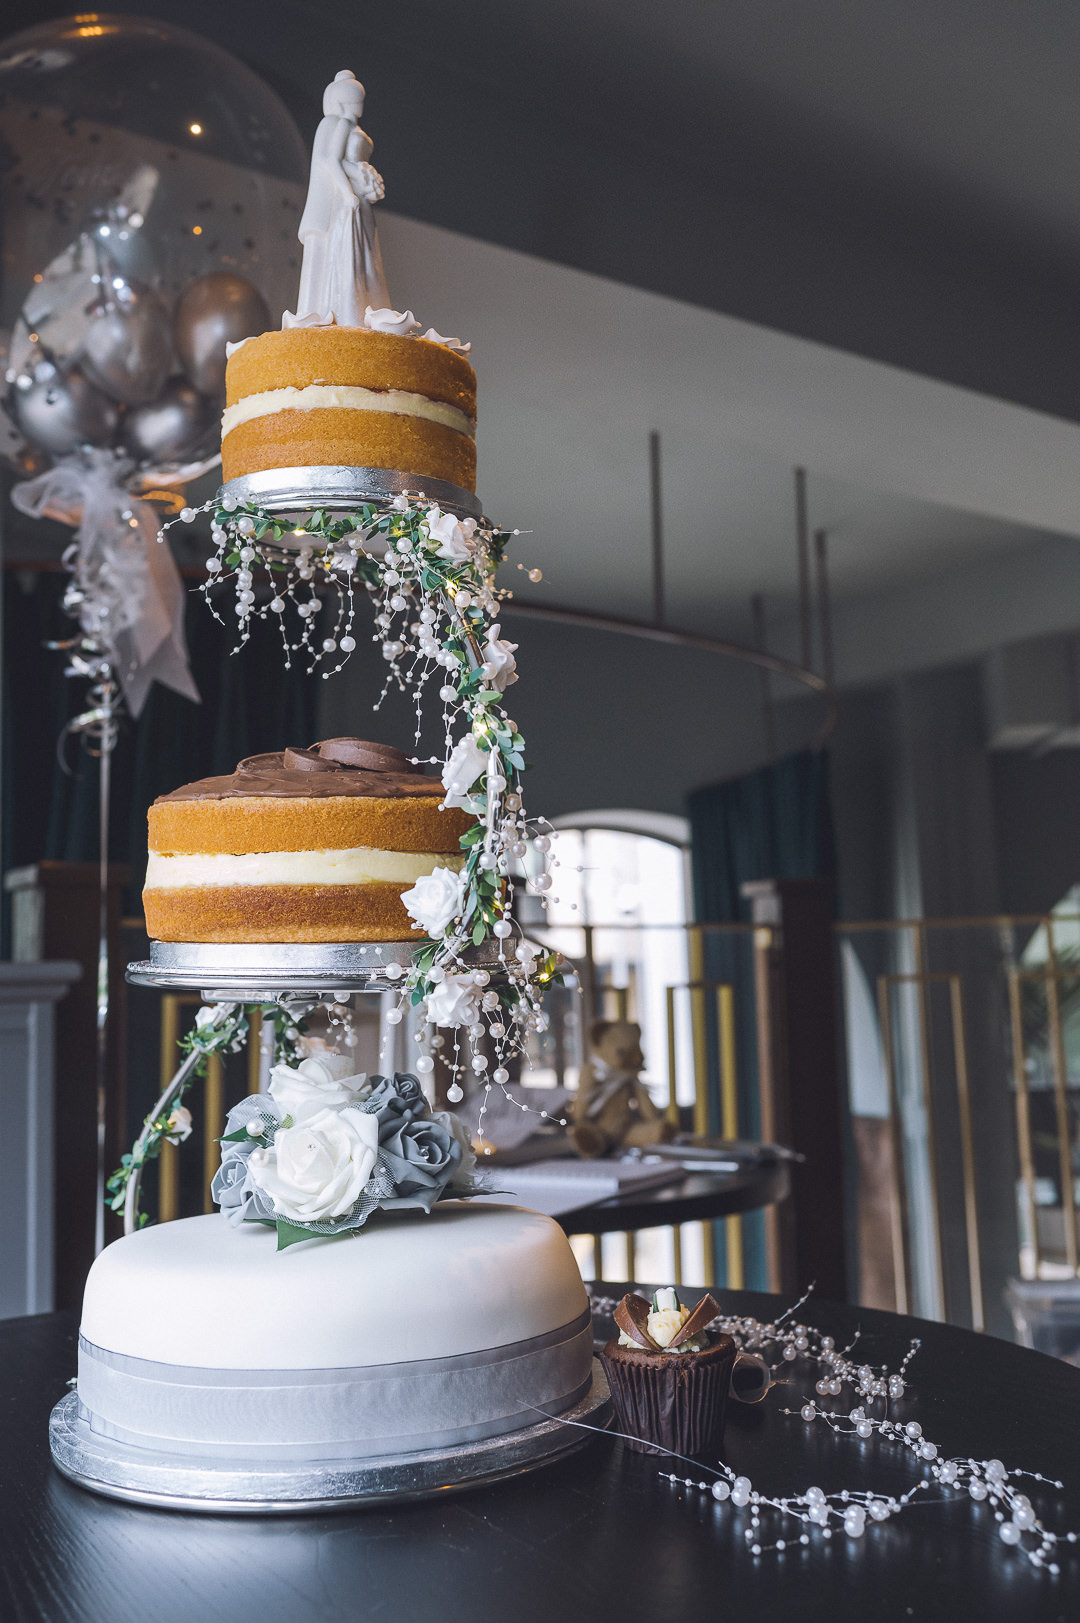 Image shows the three tiers of the wedding cake